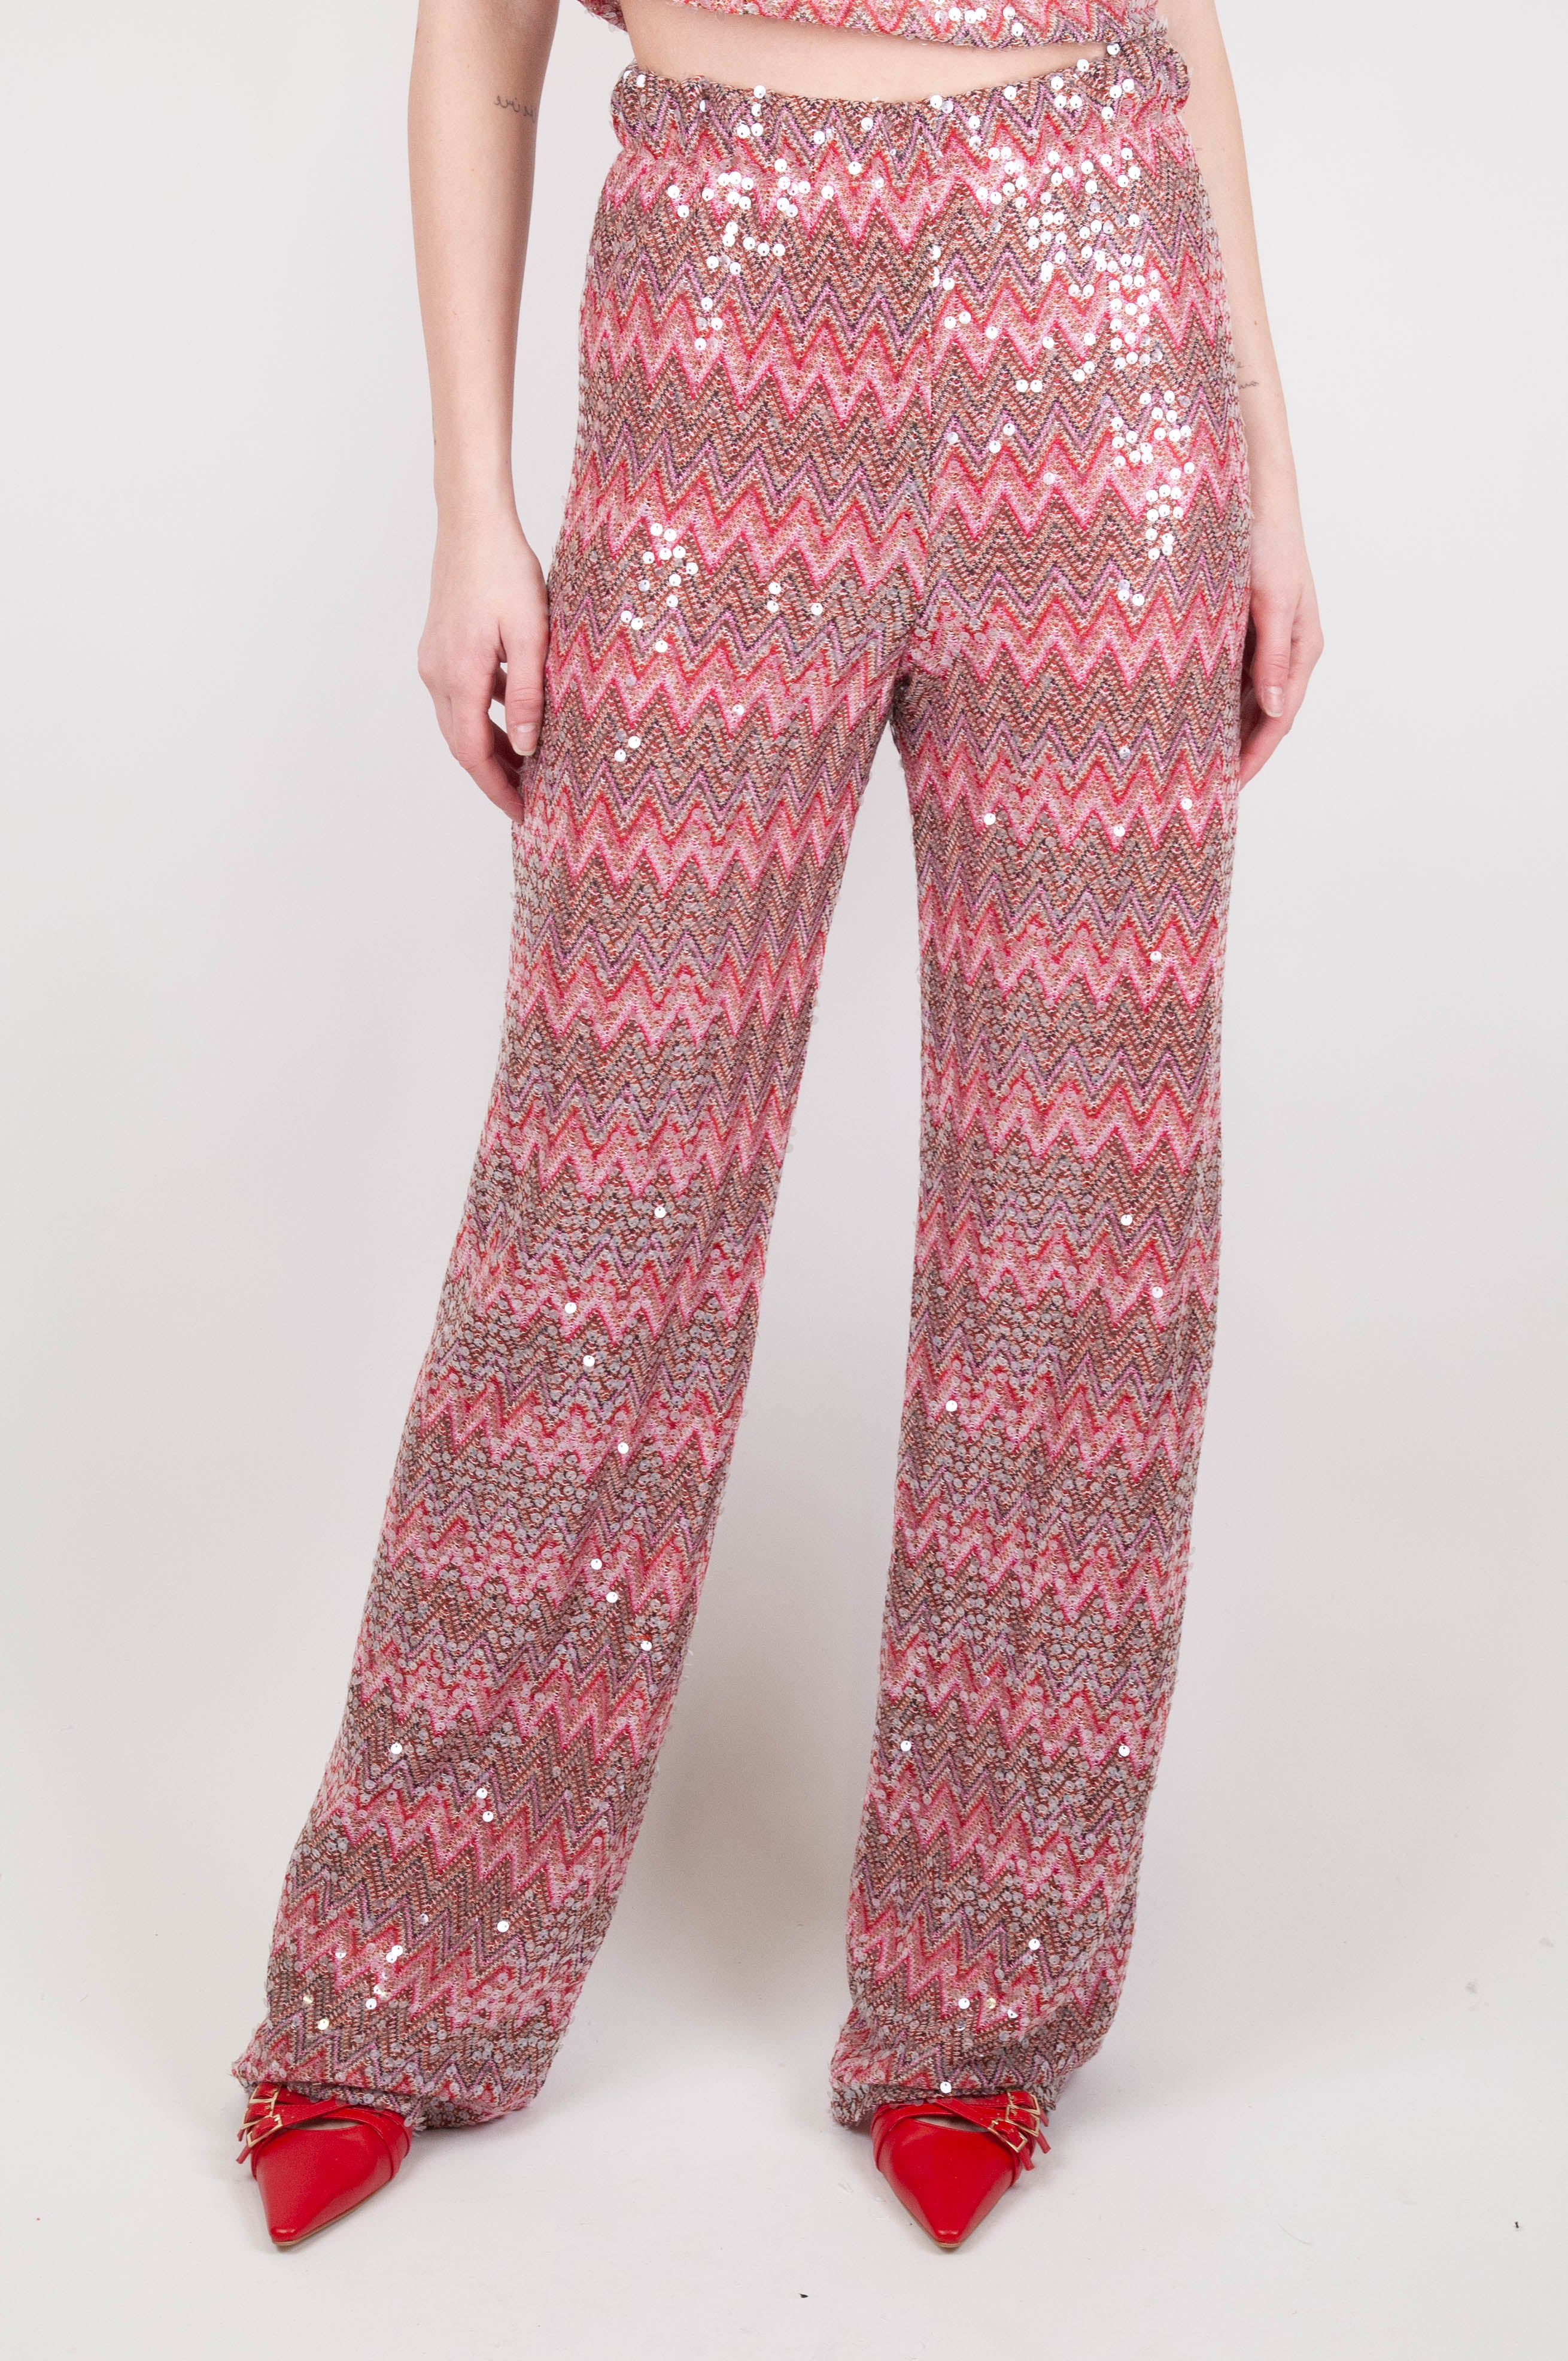 Haveone - Zig zag patterned sequin trousers